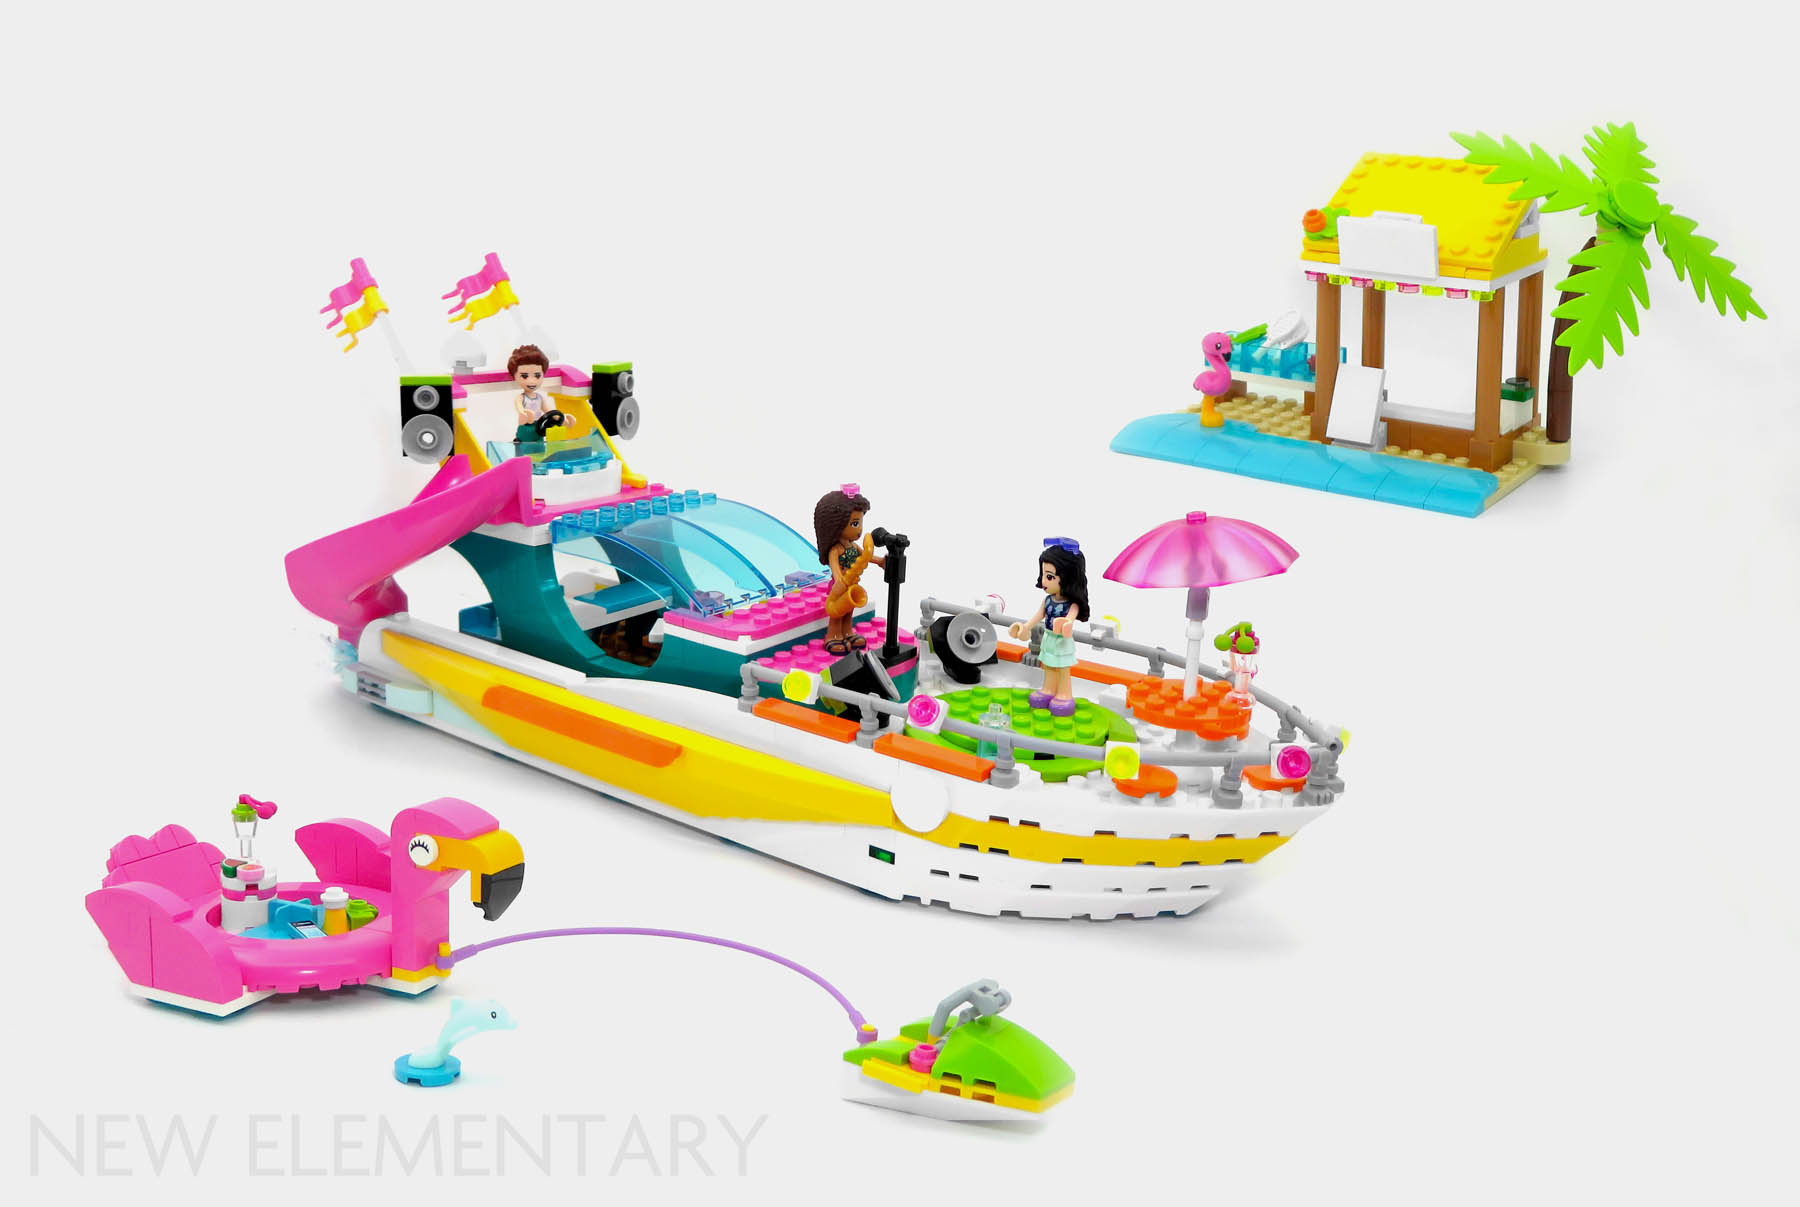 New Boat techniques Friends LEGO® and LEGO® alt review Elementary: build: sets Party parts, & | 41433